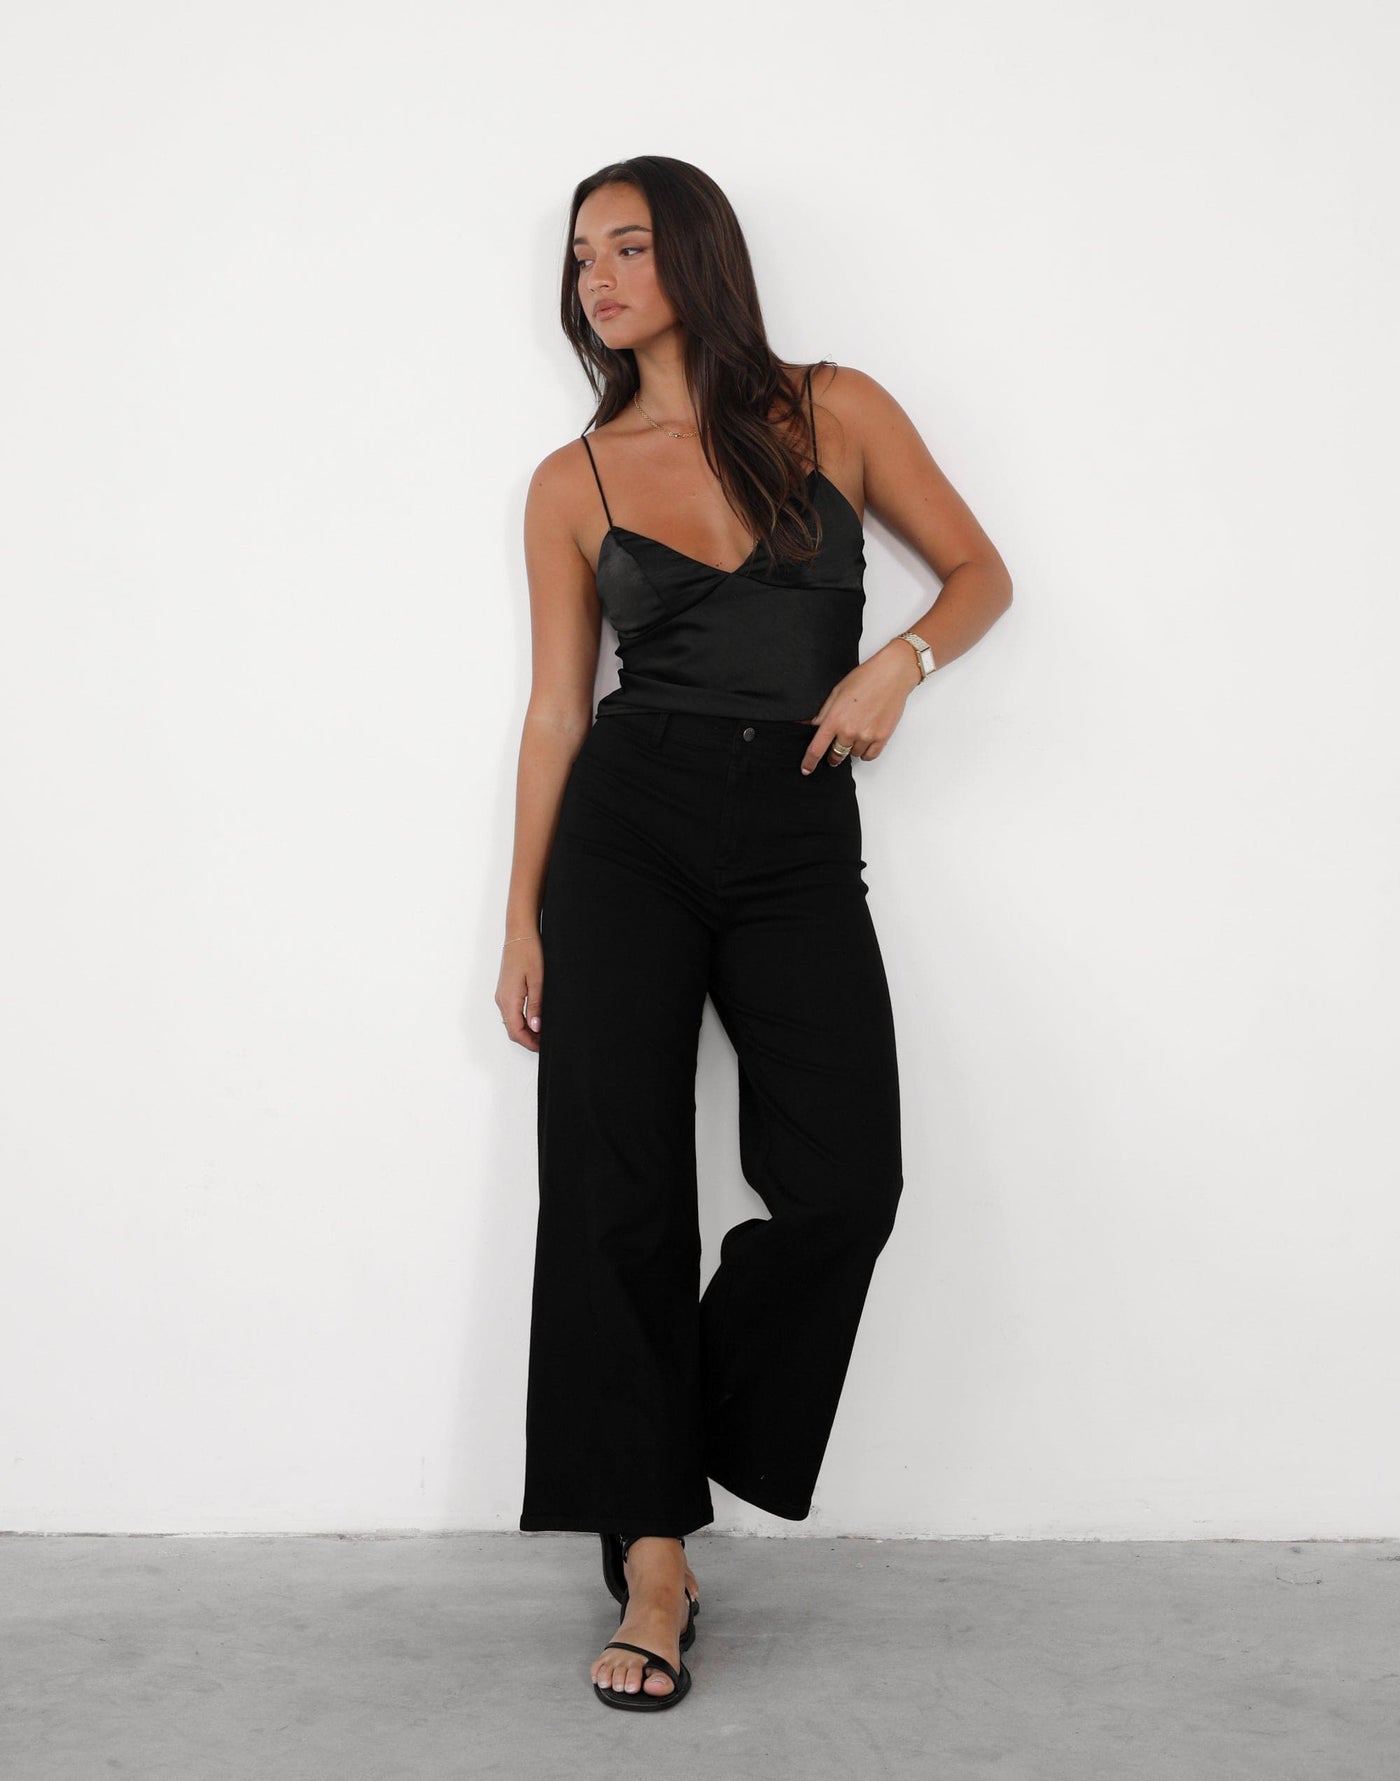 Litianah Jeans (Black) - High Waisted Jeans - Women's Pants - Charcoal Clothing